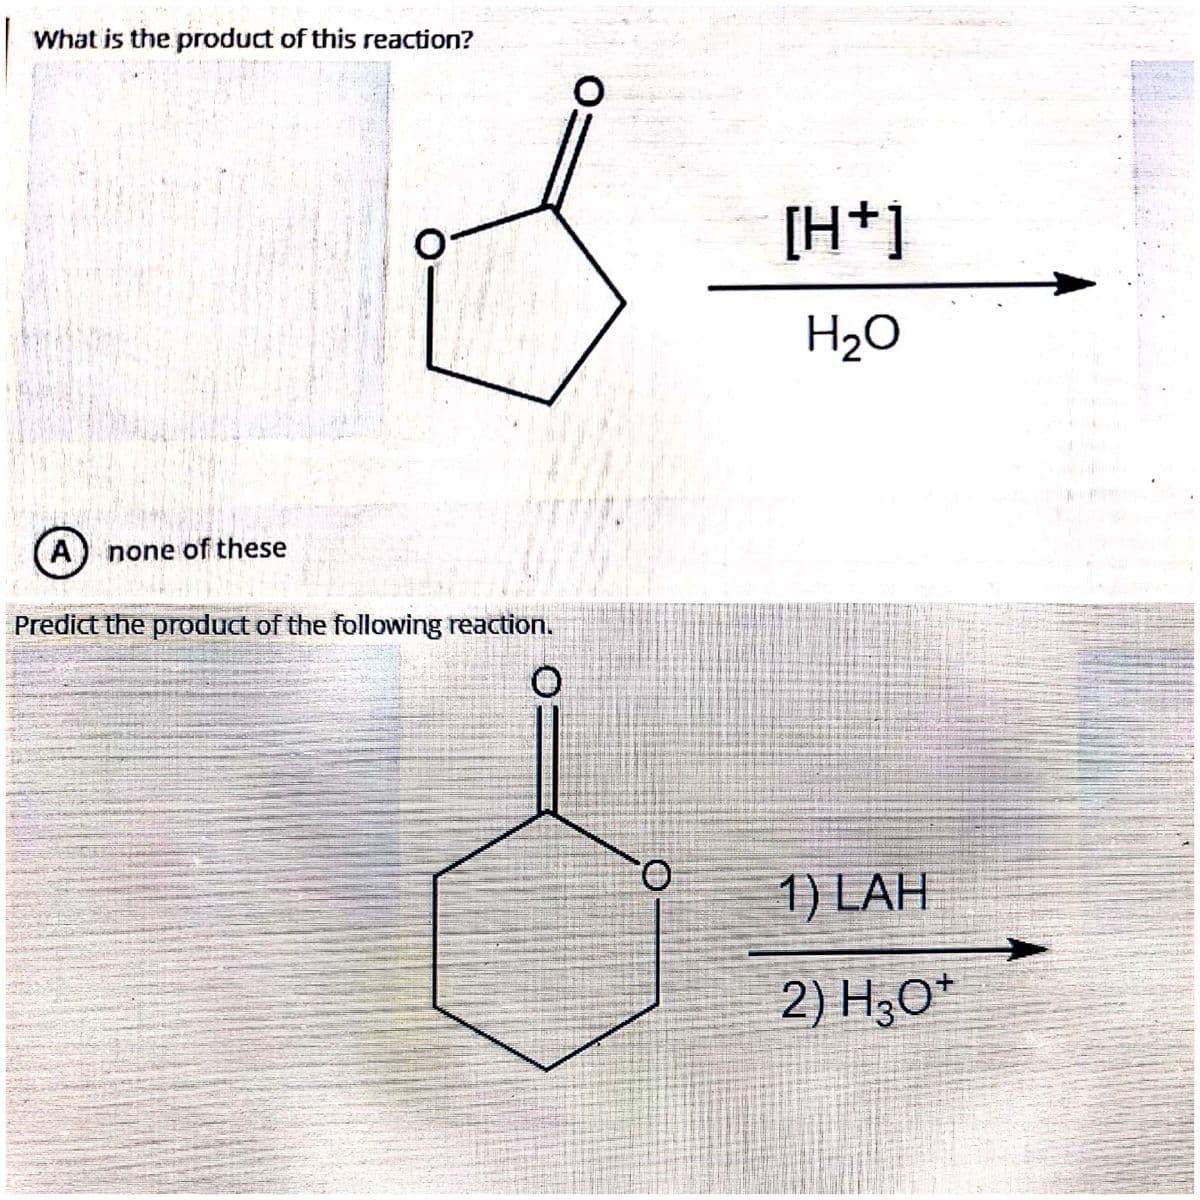 What is the product of this reaction?
[H+]
H2O
A) none of these
Predict the product of the following reaction.
1) LAH
2) H,O*
